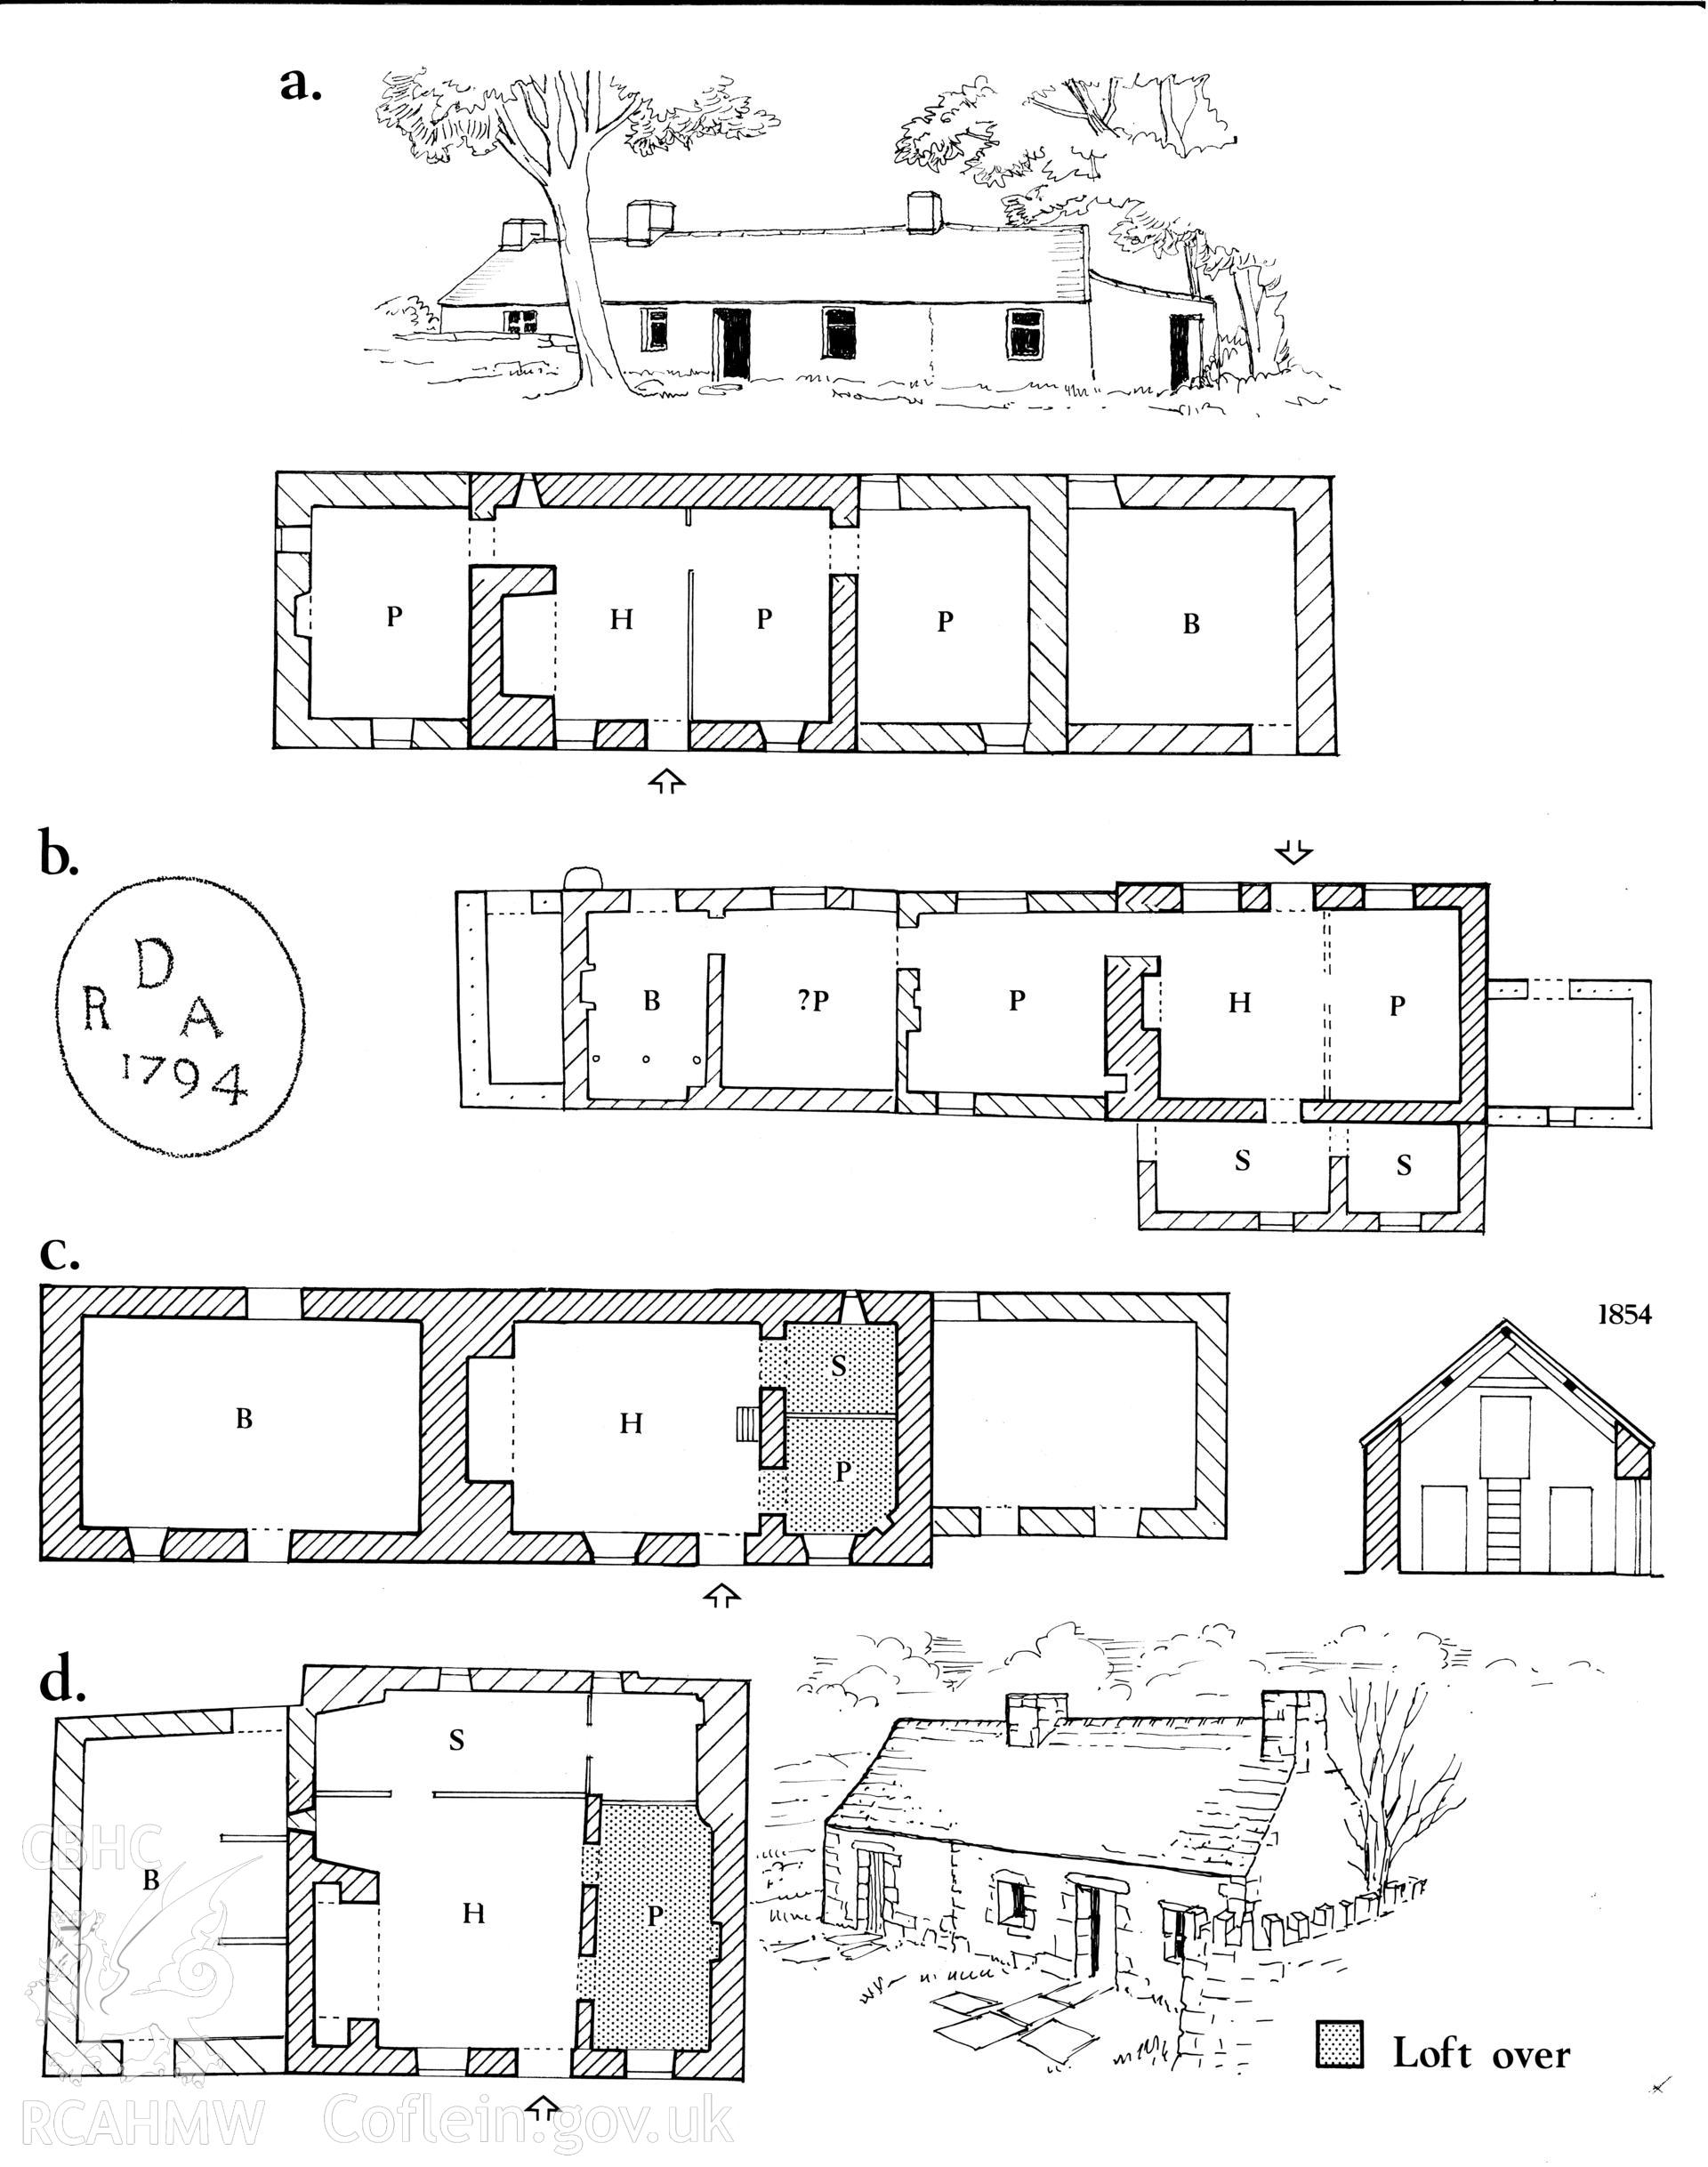 Multi-site RCAHMW drawing, 4 sites, (ink on linen) showing plan & elevation of small cottages in the parish of Llanwnda, as published in Houses of the Welsh Countryside, fig 184.